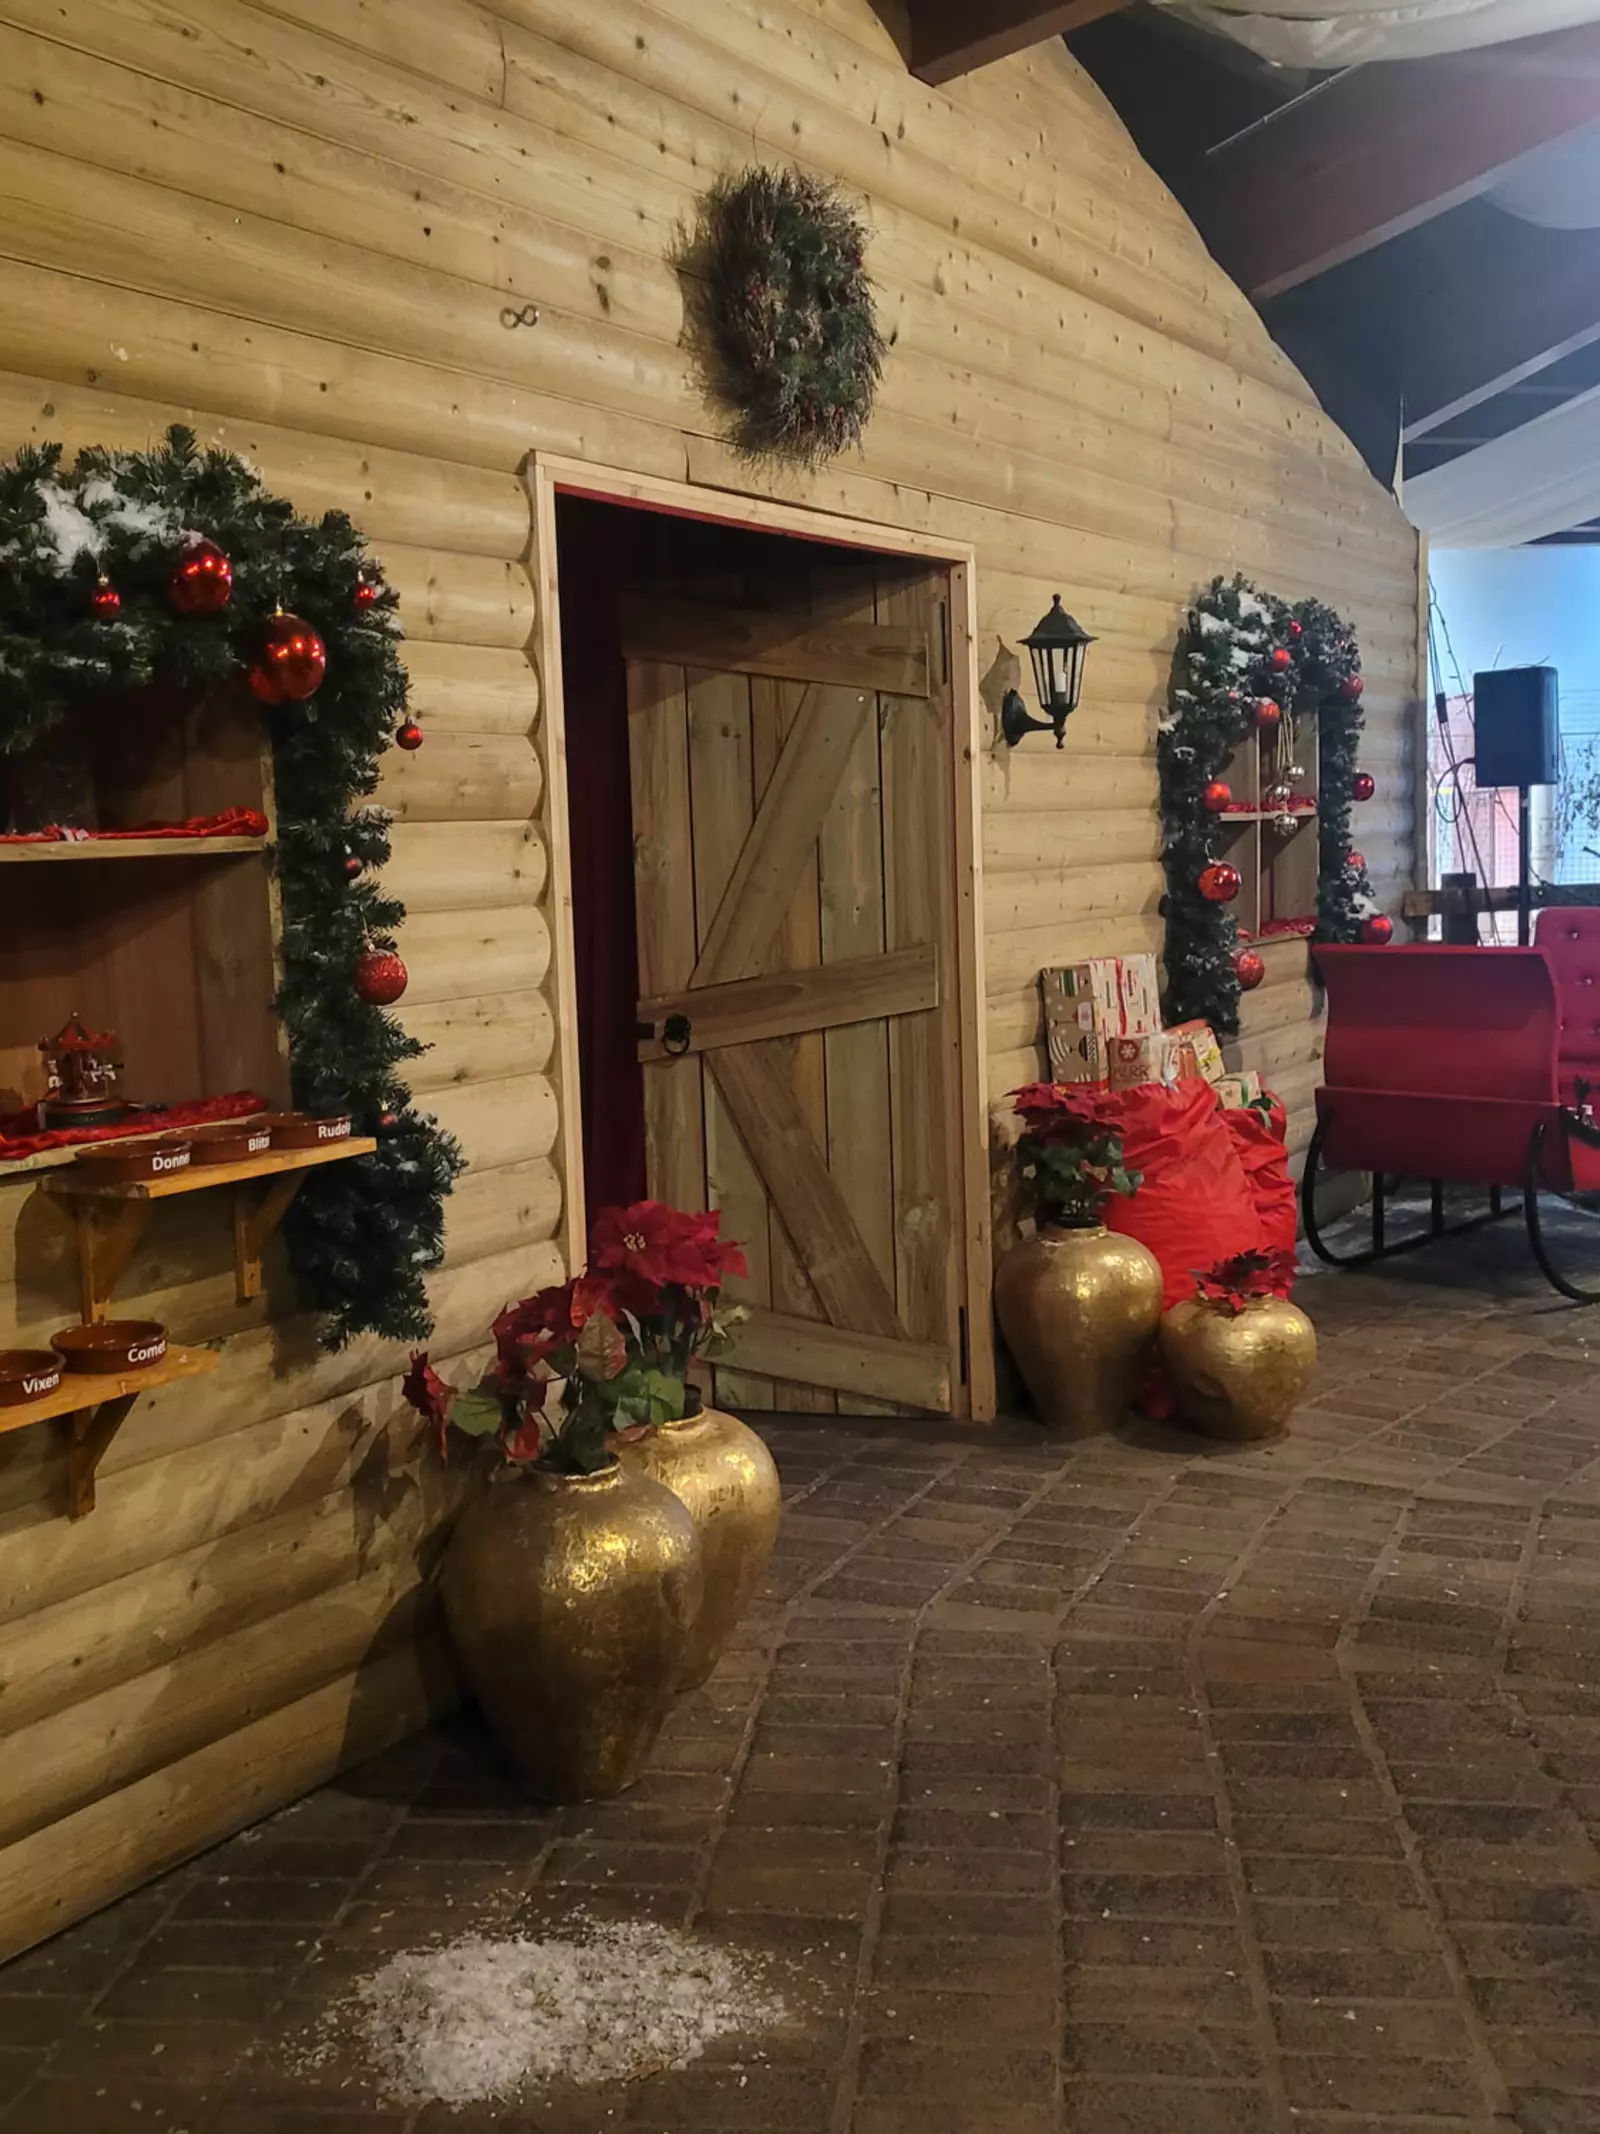 A venue decorated for a Christmas parties